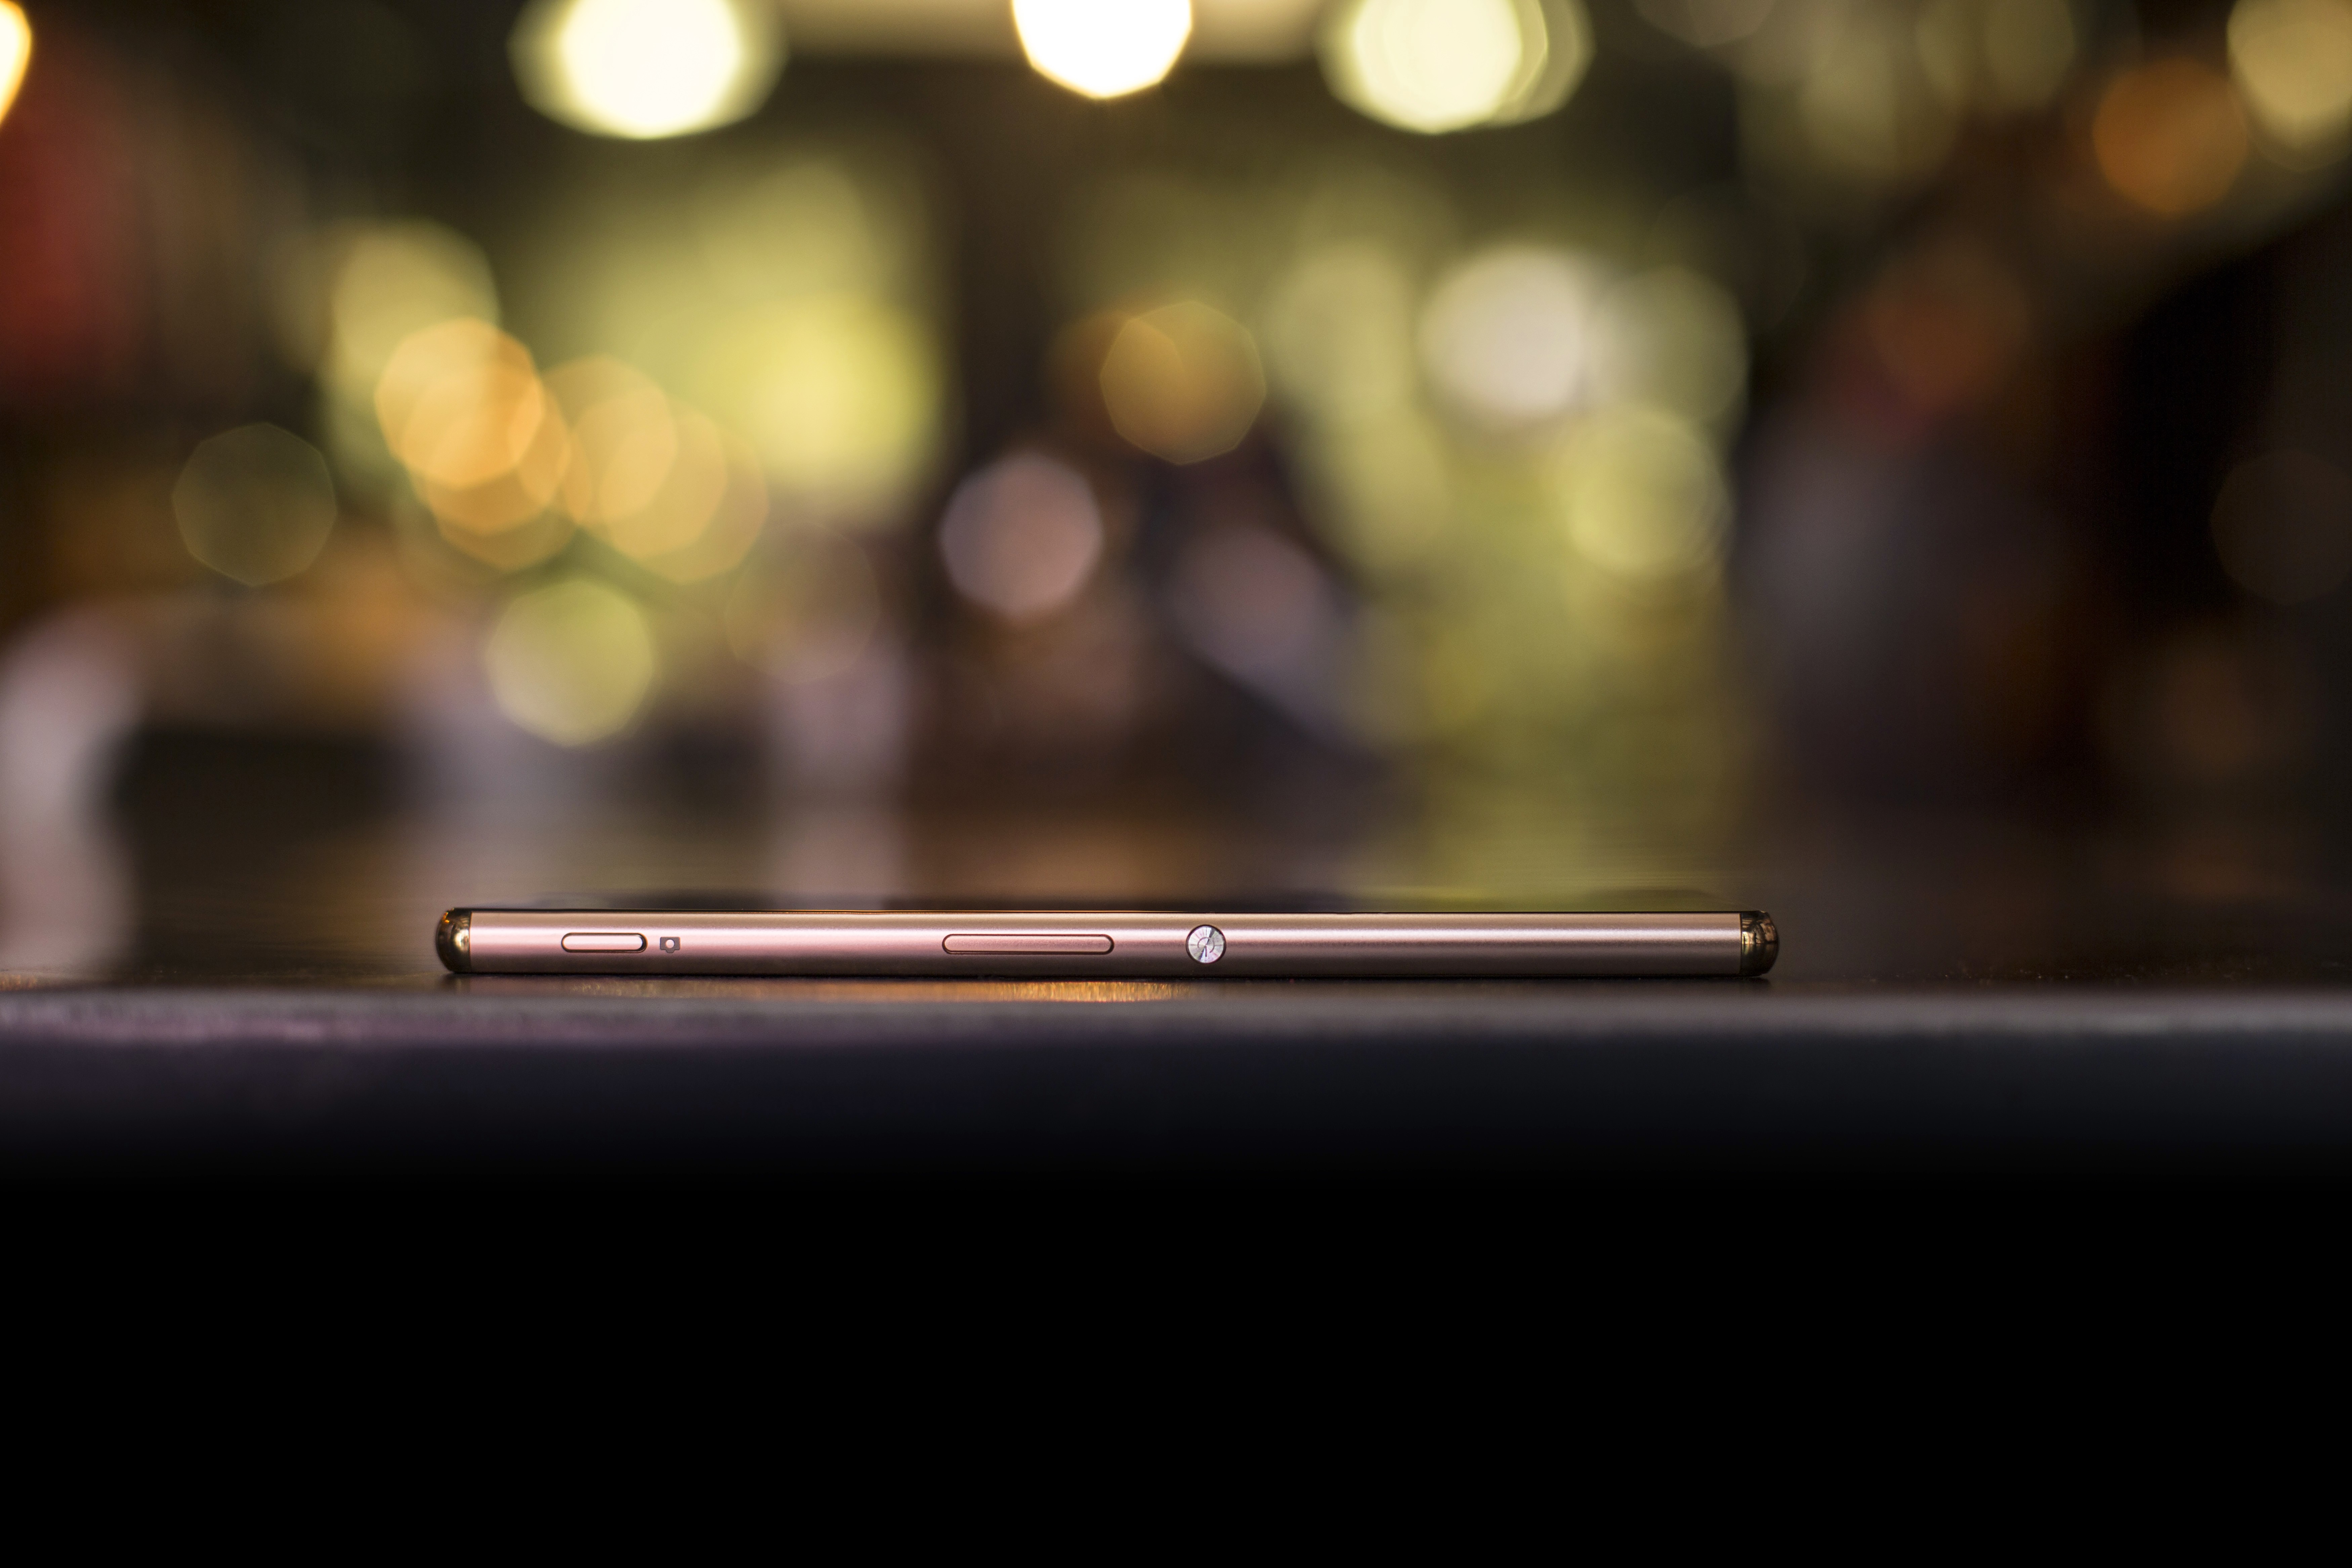 Sony Xperia Z3+ Dual goes on sale next month